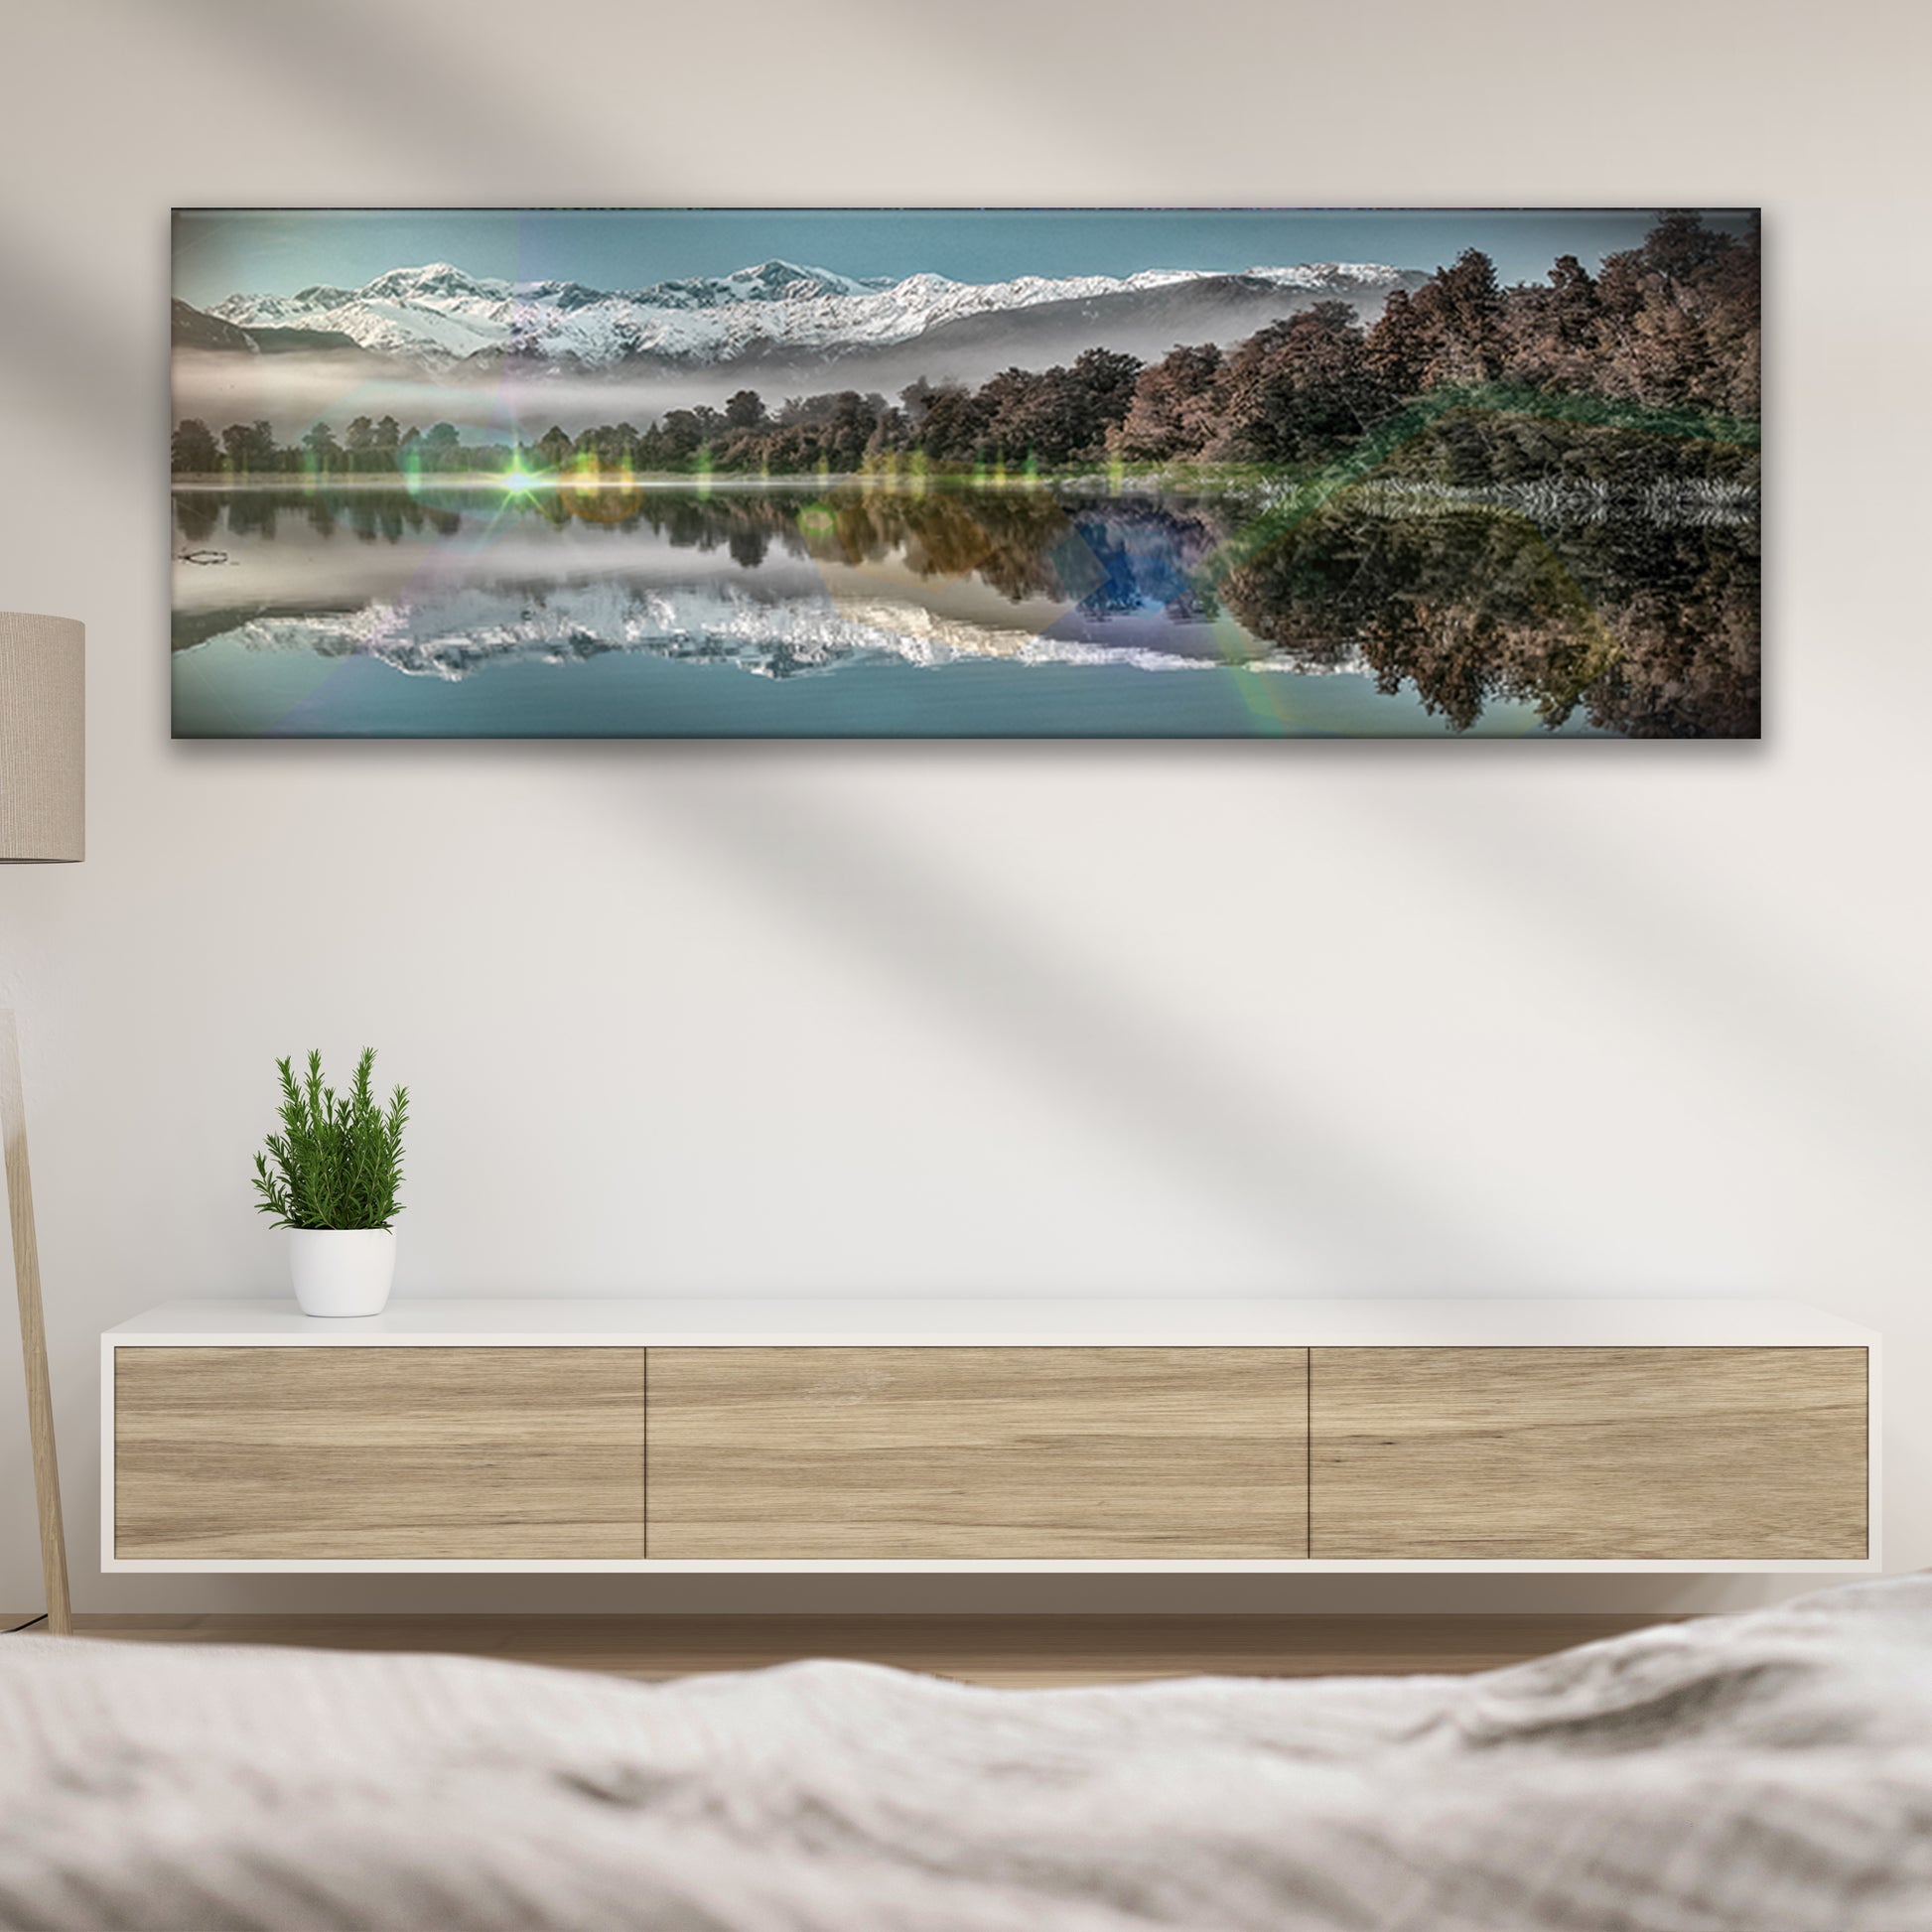 Lake Matheson At Dusk Canvas Wall Art - Image by Tailored Canvases